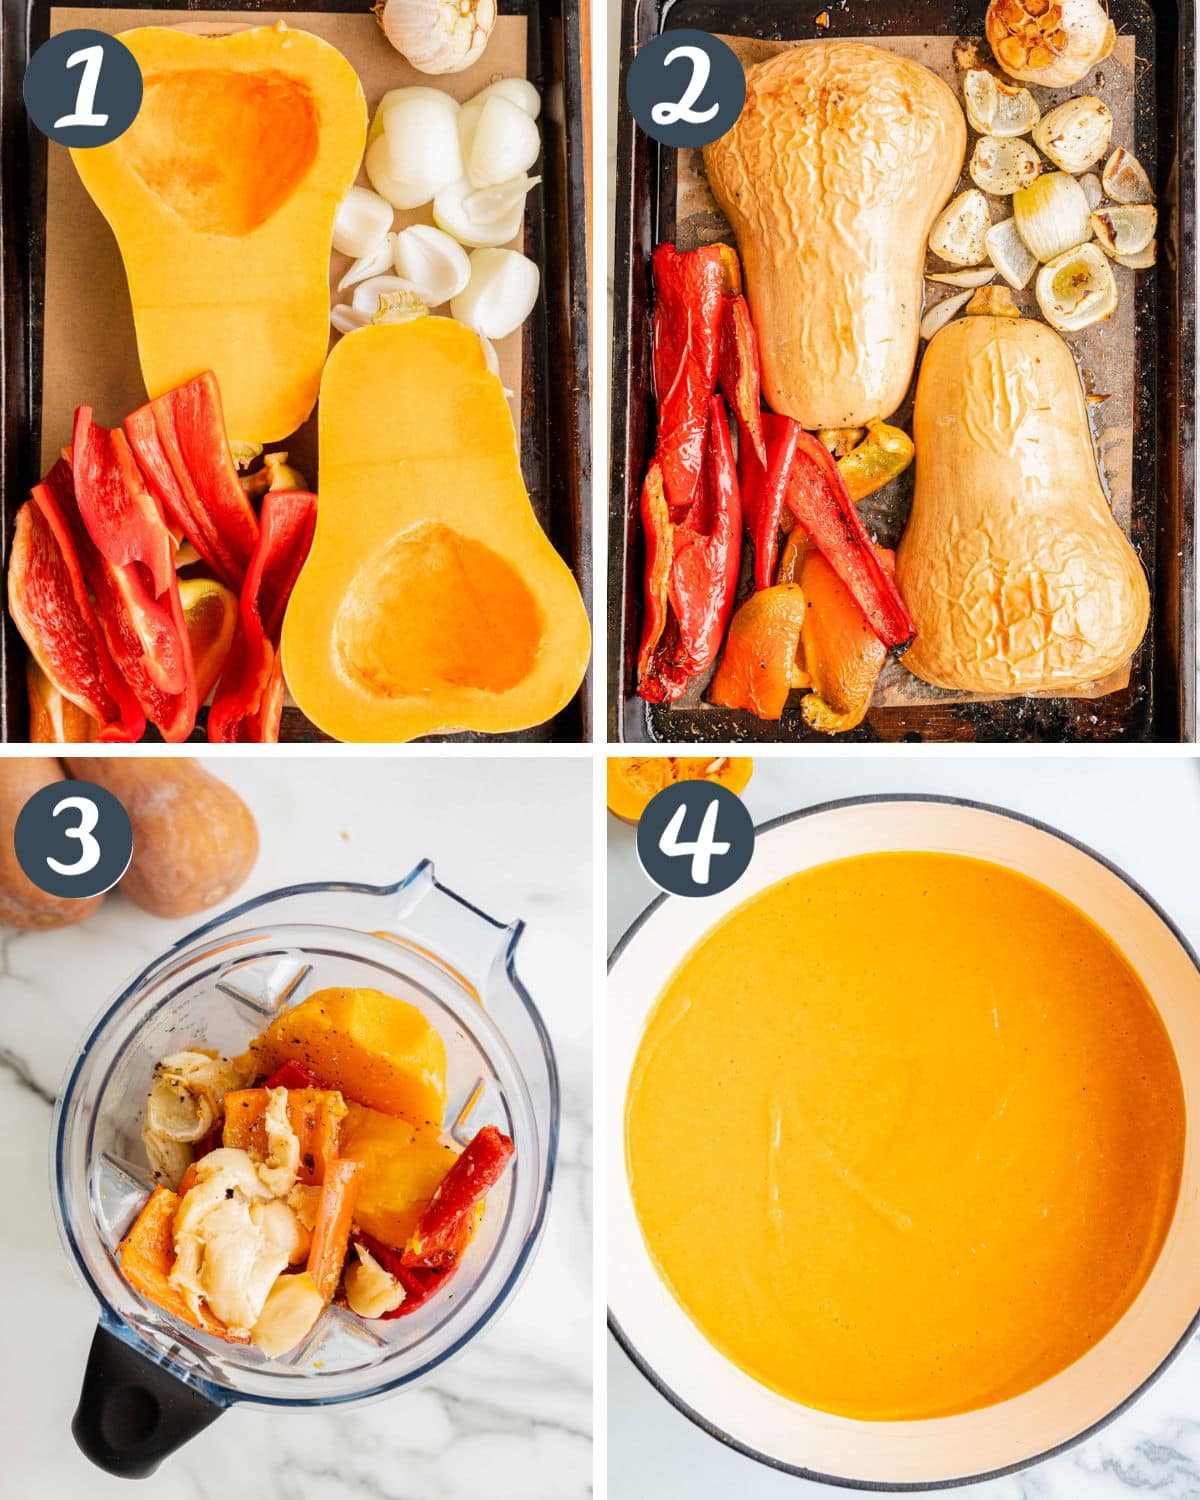 4 images showing the recipe steps, with veggies on a roasting pan, in a blender, and then blended in a pan.